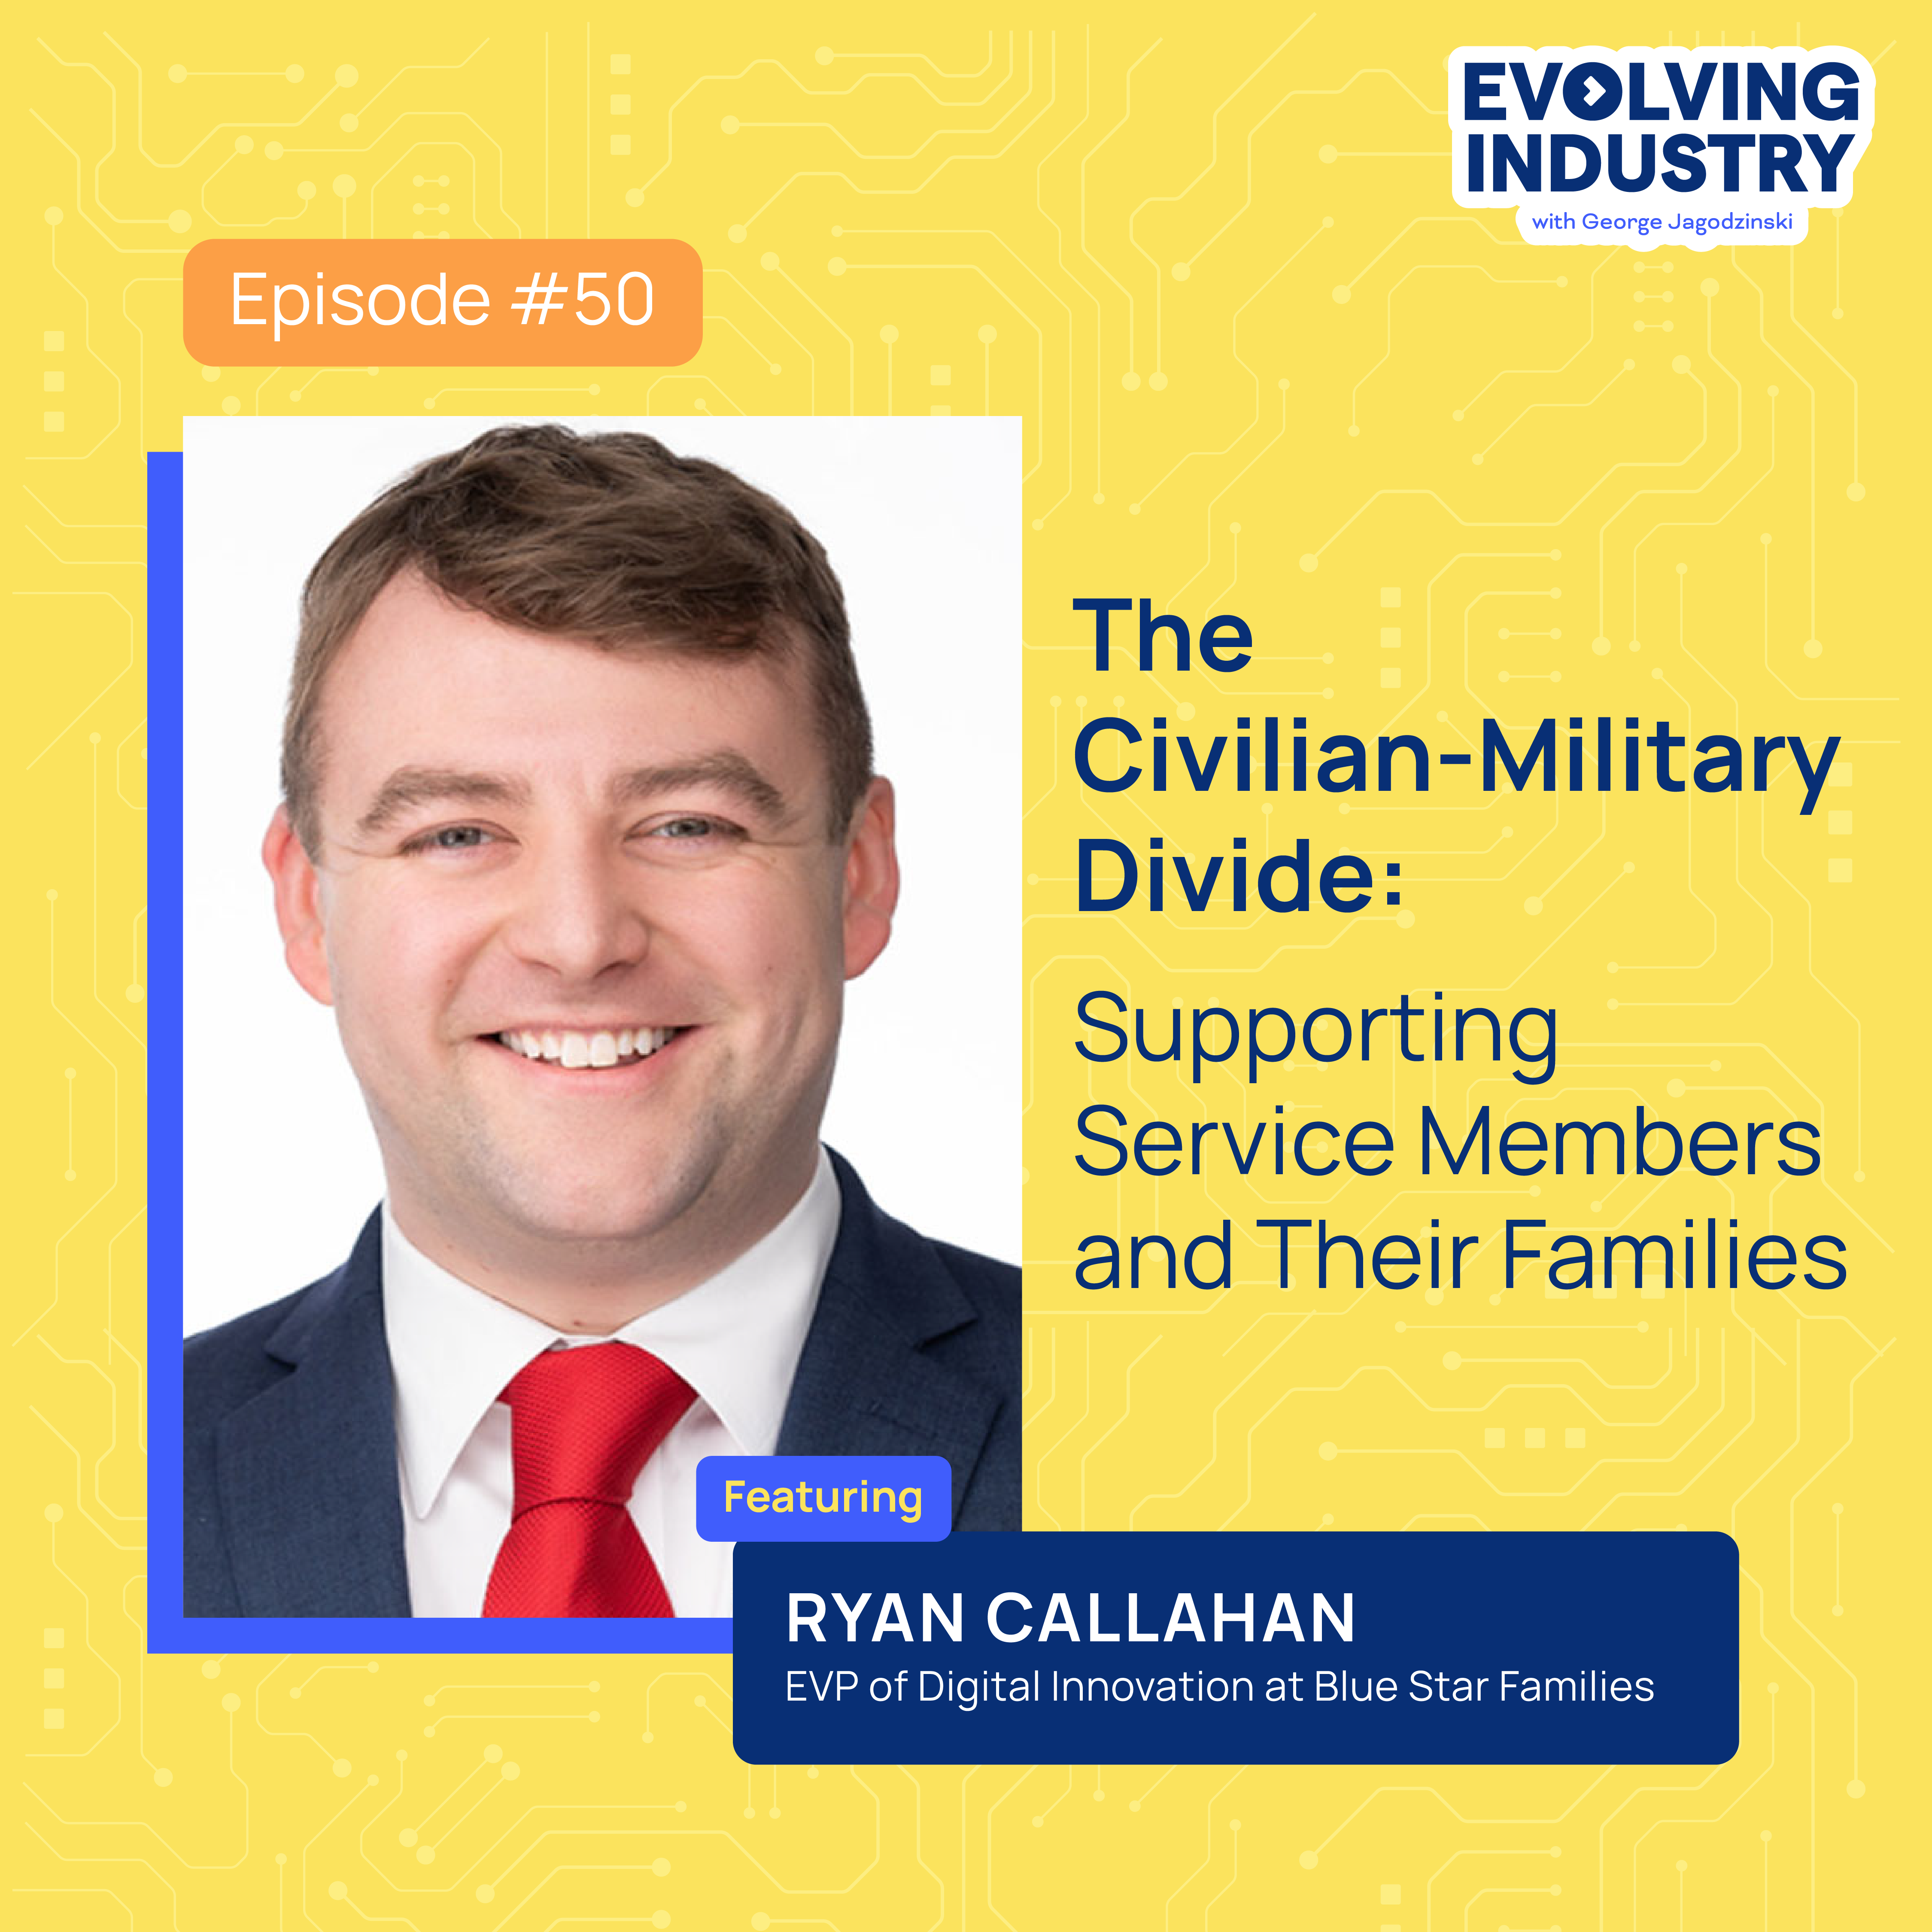 The Civilian-Military Divide: The Families Behind the Heroes